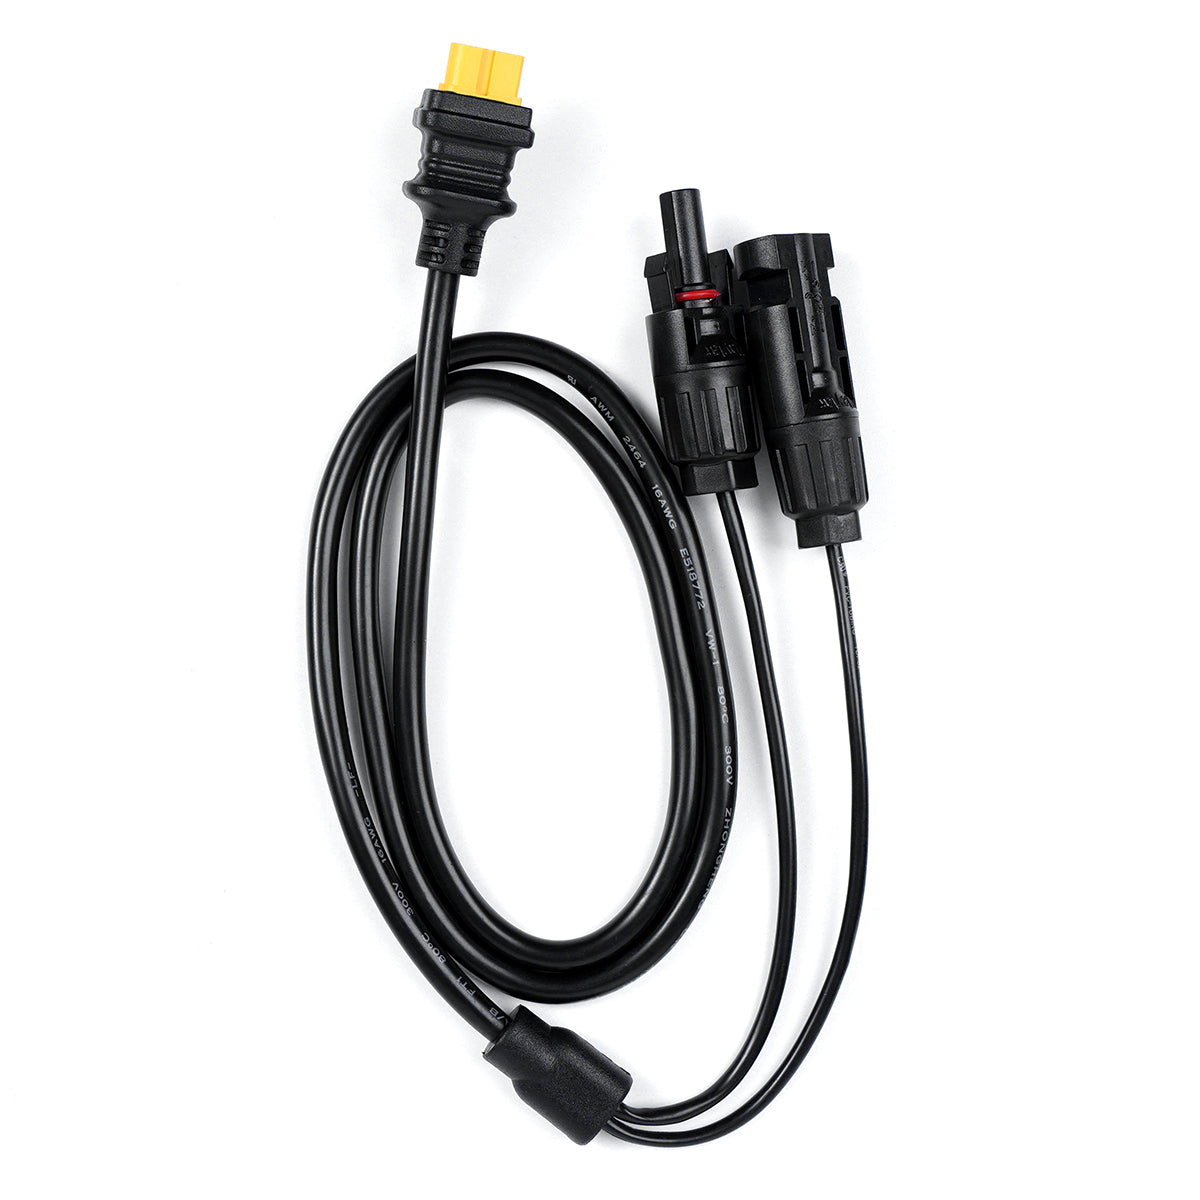 OUKITEL Solar Panel Extension Cable